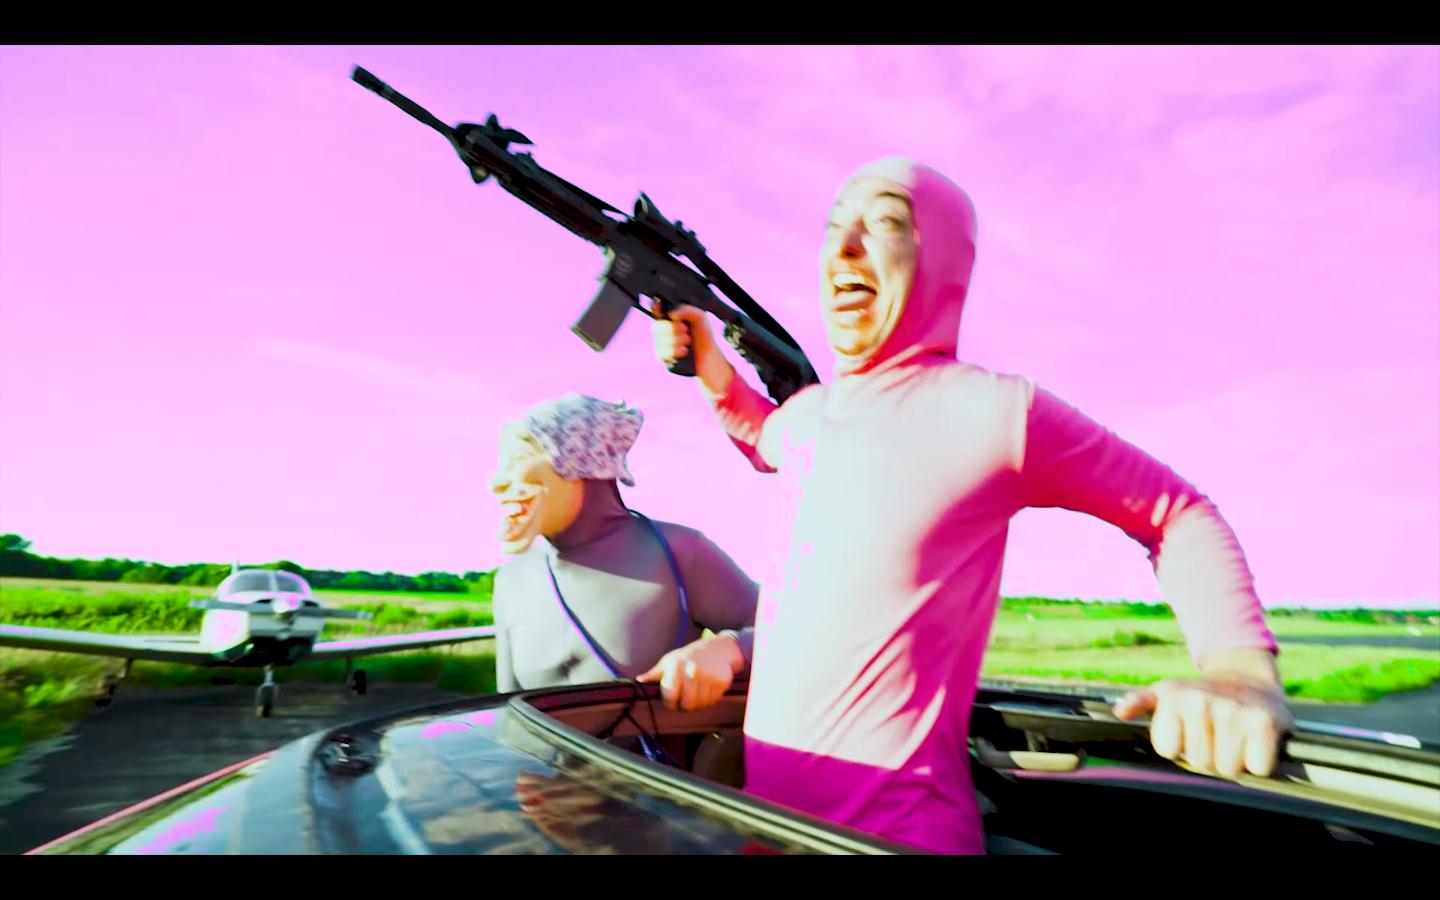 Filthy Frank Wallpapers - Wallpaper Cave